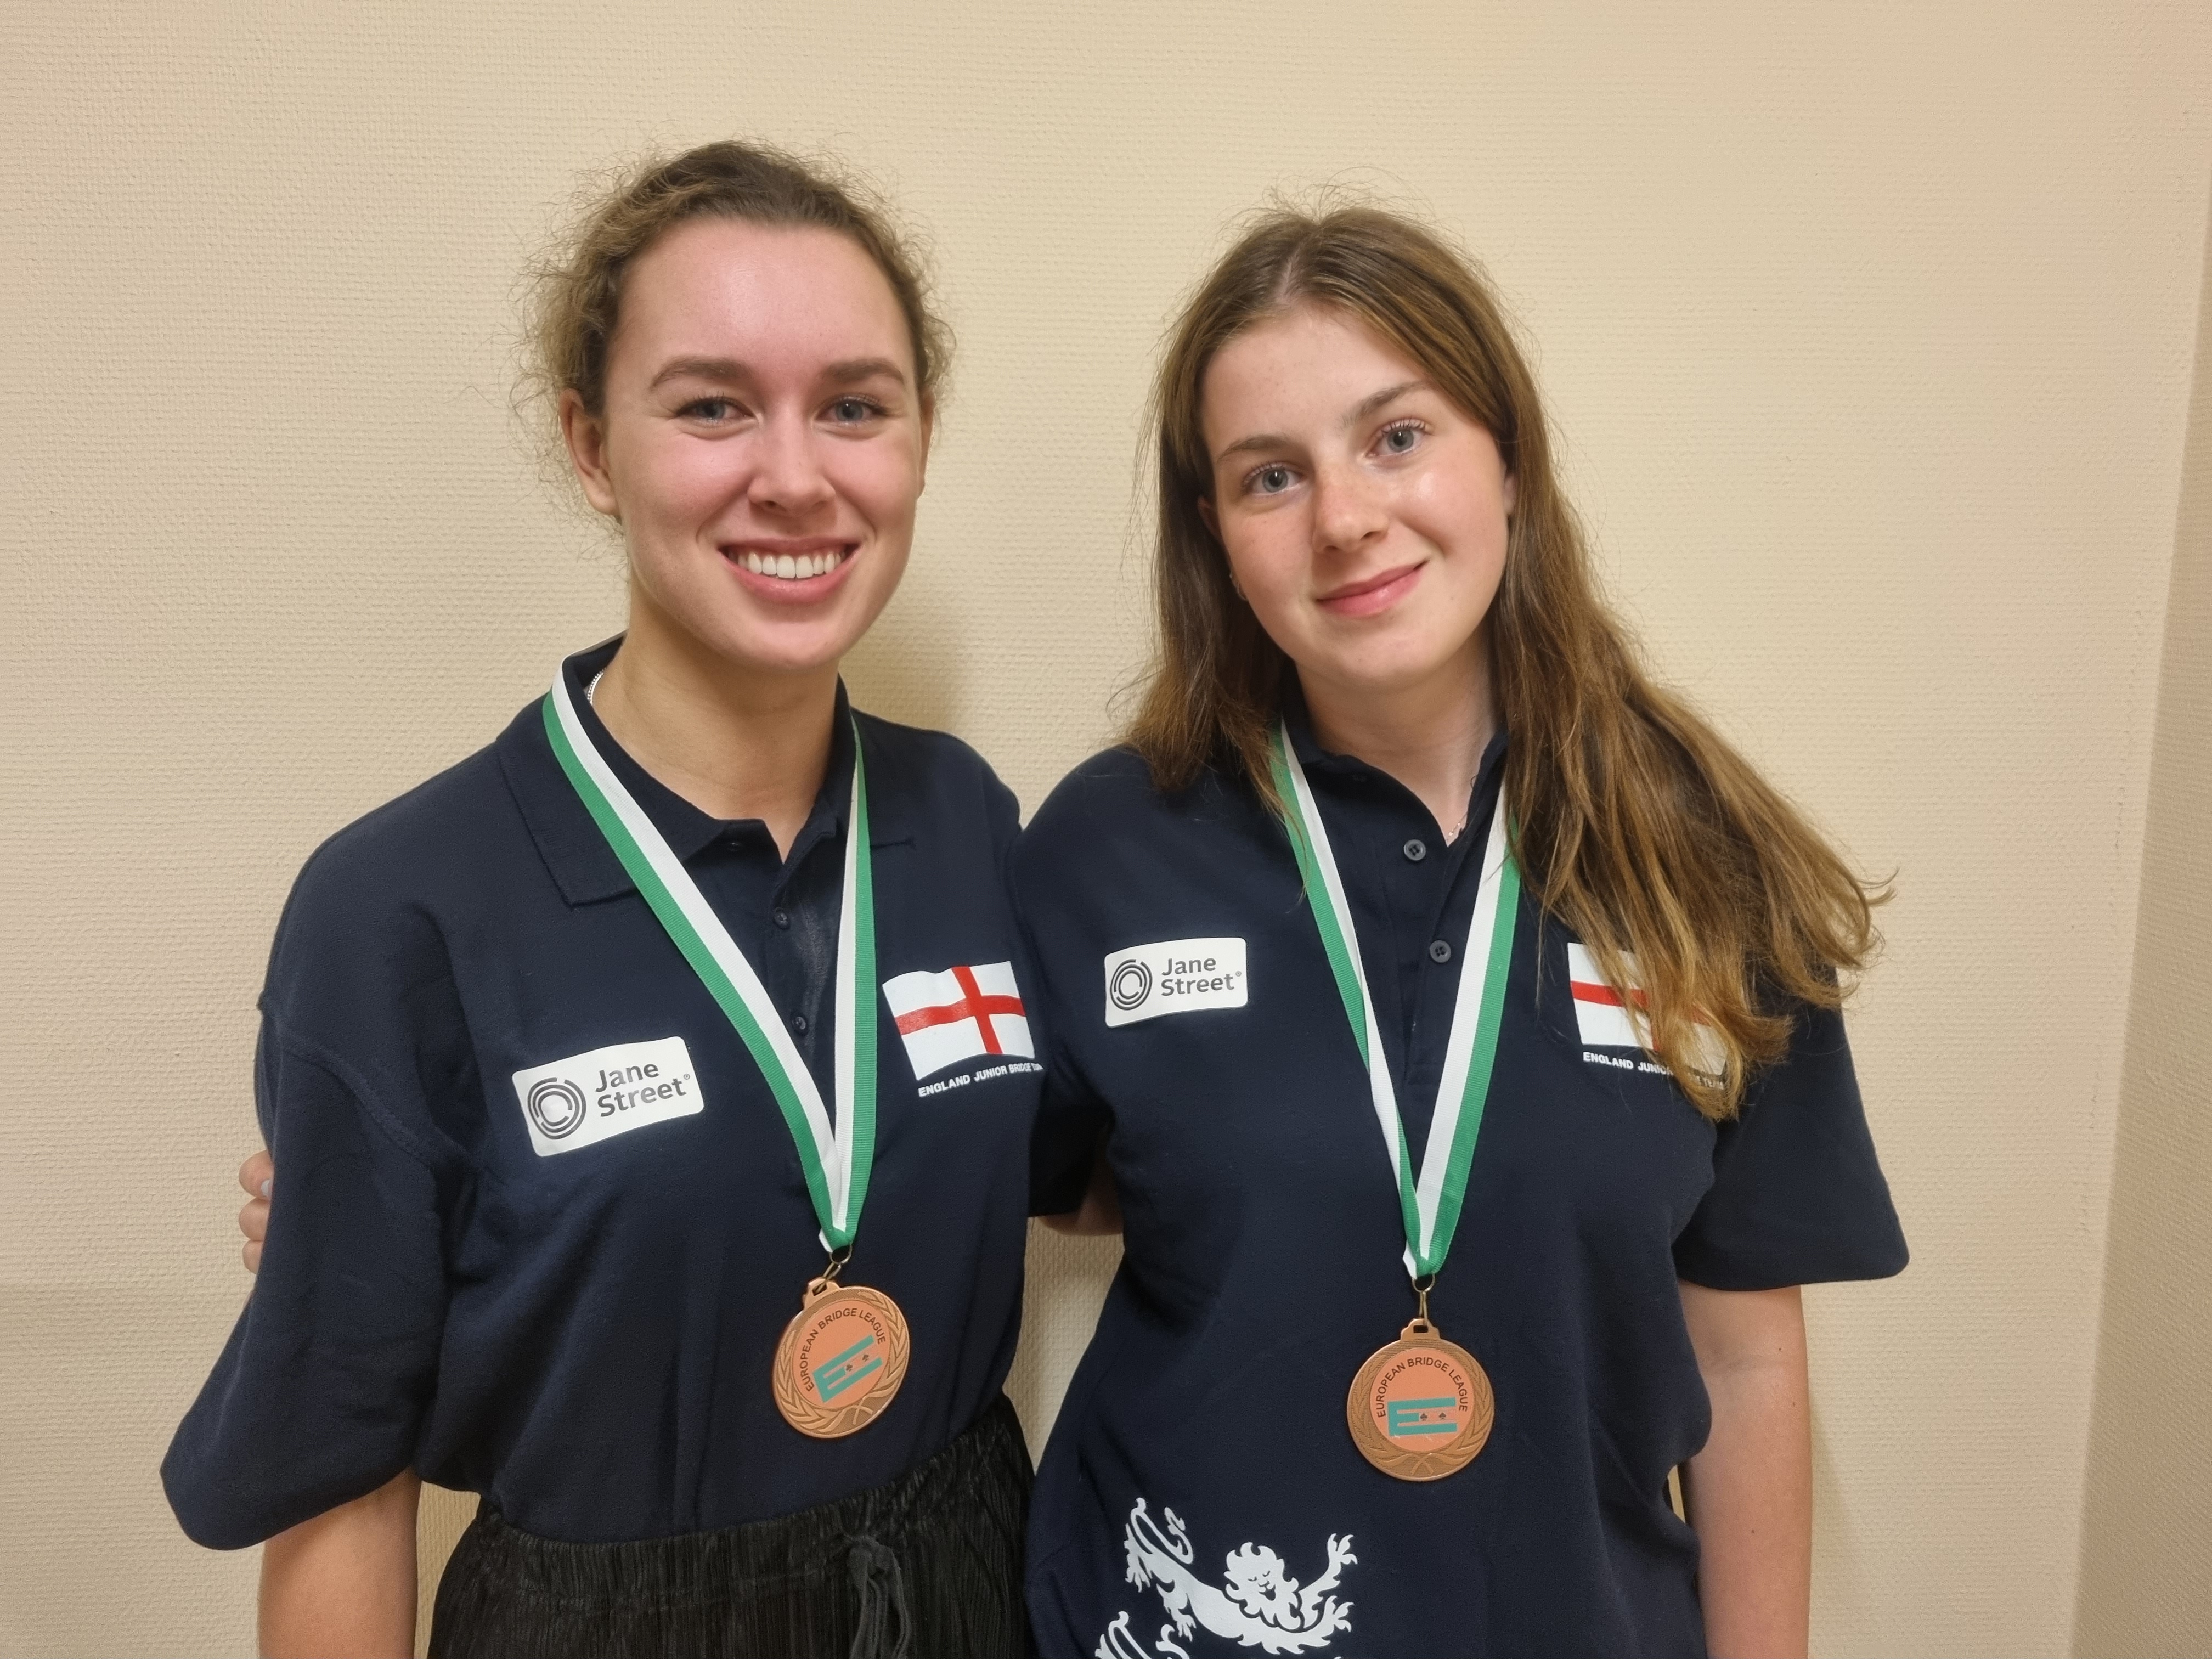 Bridge players Lottie and Imogen from the England U26W youth squad are smiling at the camera and wearing their bronze medals